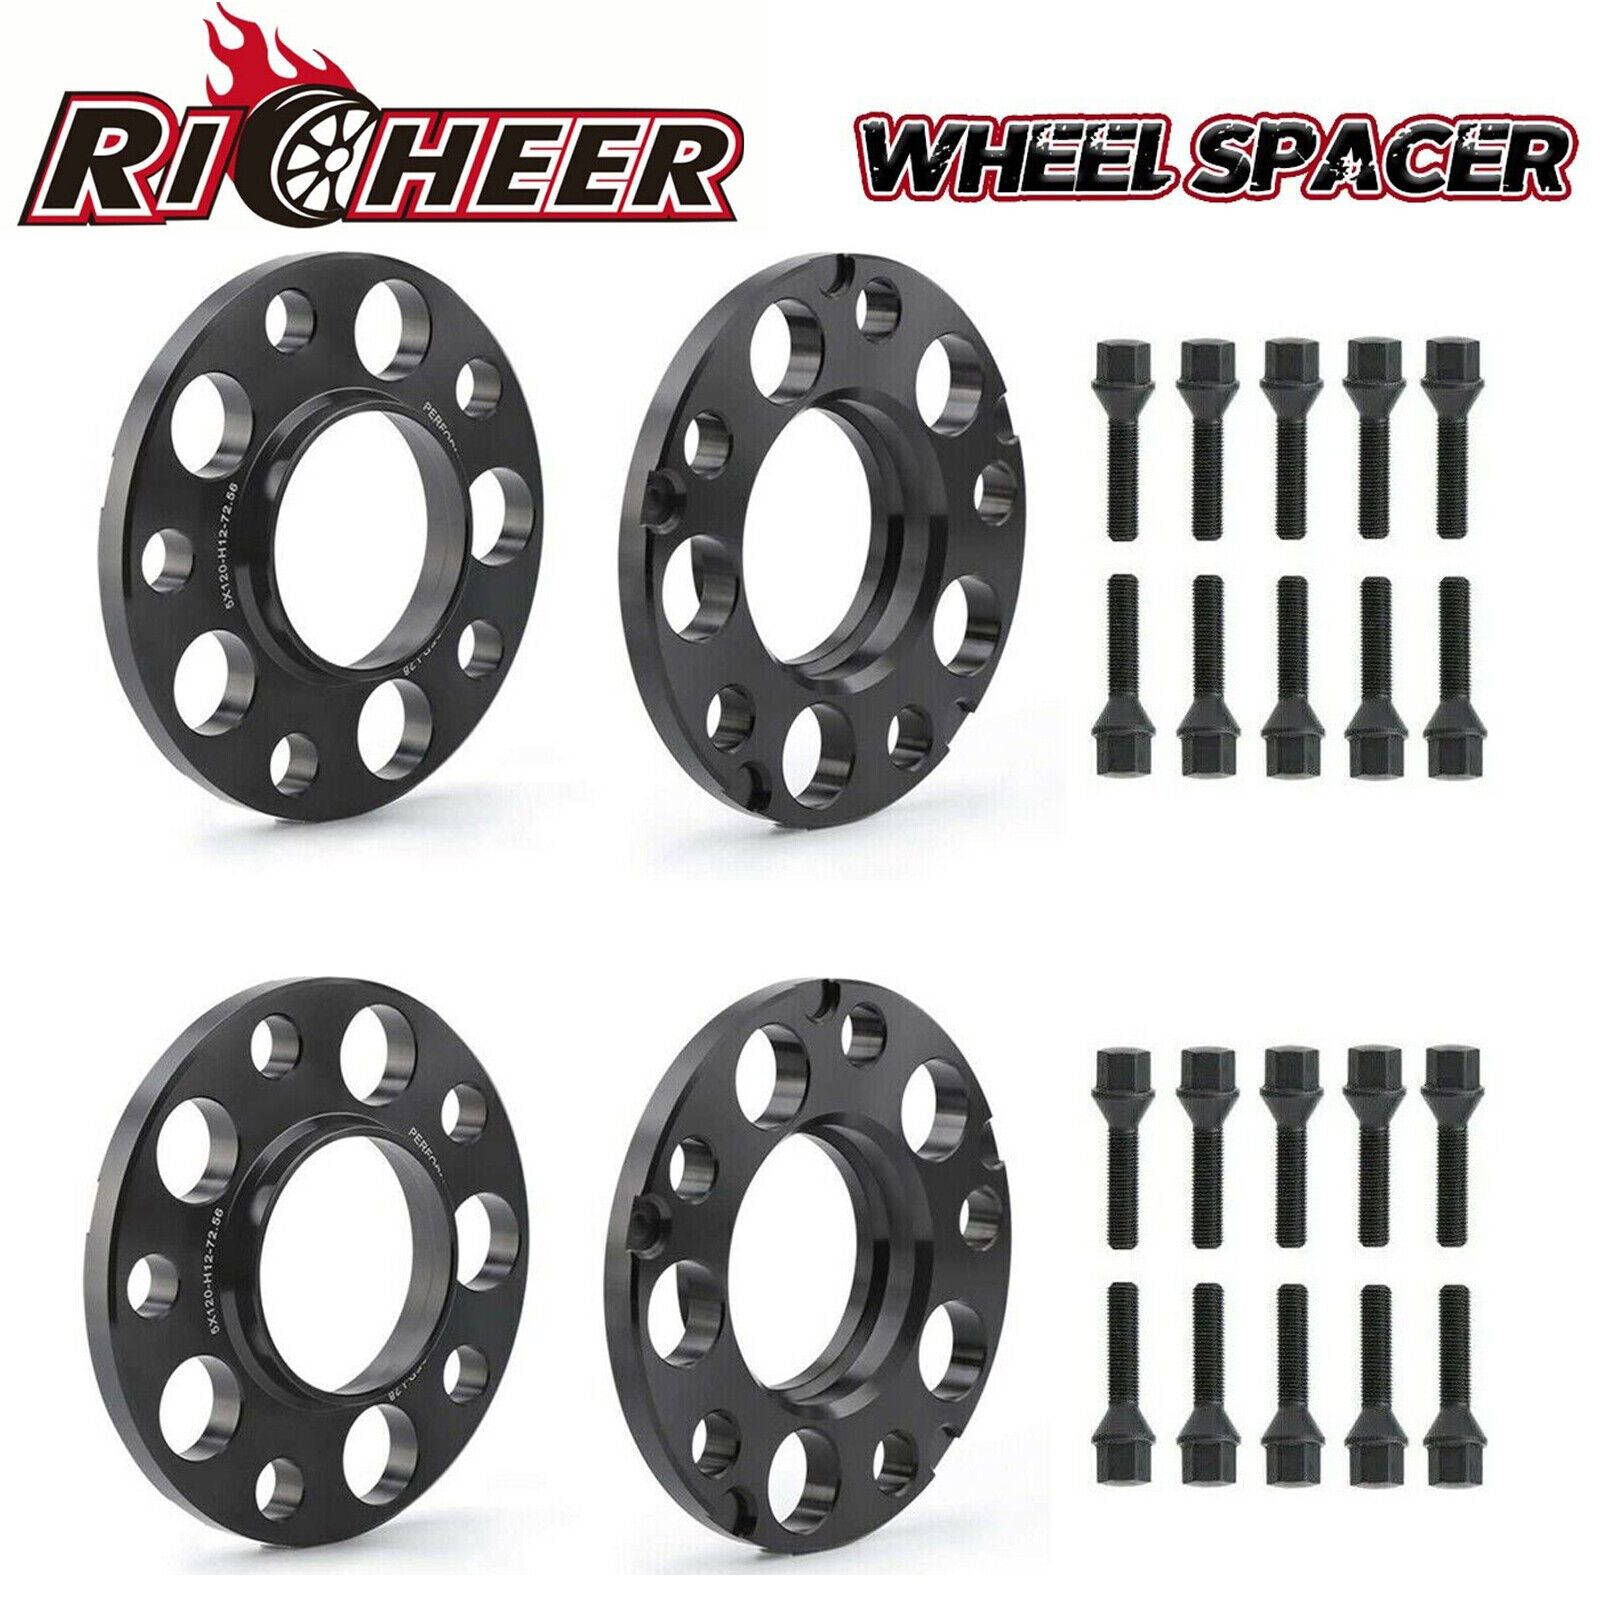 12 + 15mm 5x120 Wheel Spacers HubCentric For BMW F Series F30 F32 F33 F80 F10 M3